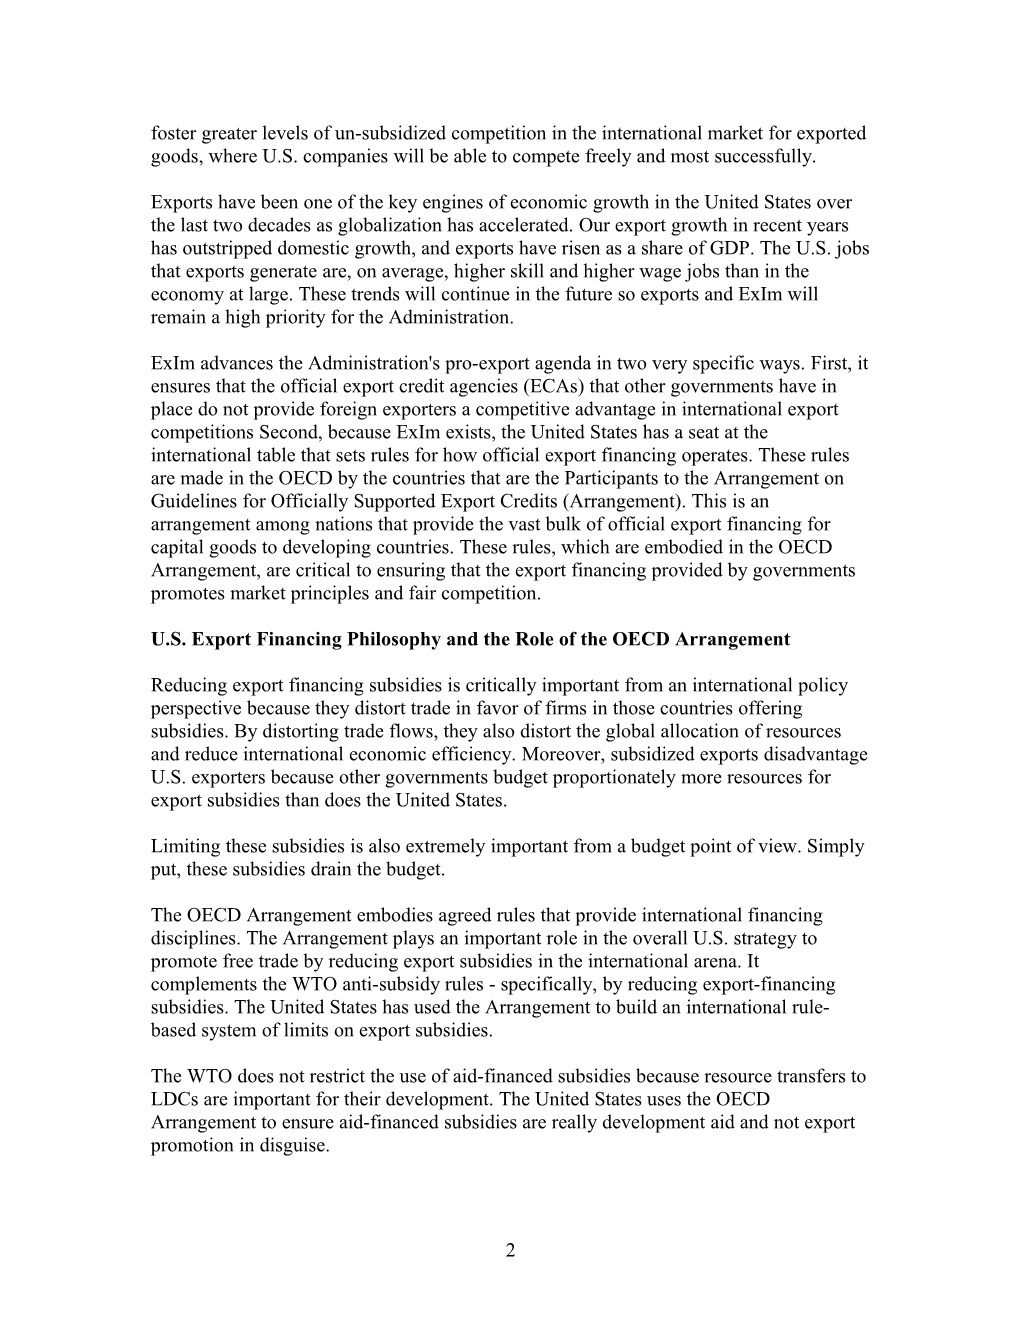 Reauthorization of the Export Import Bank